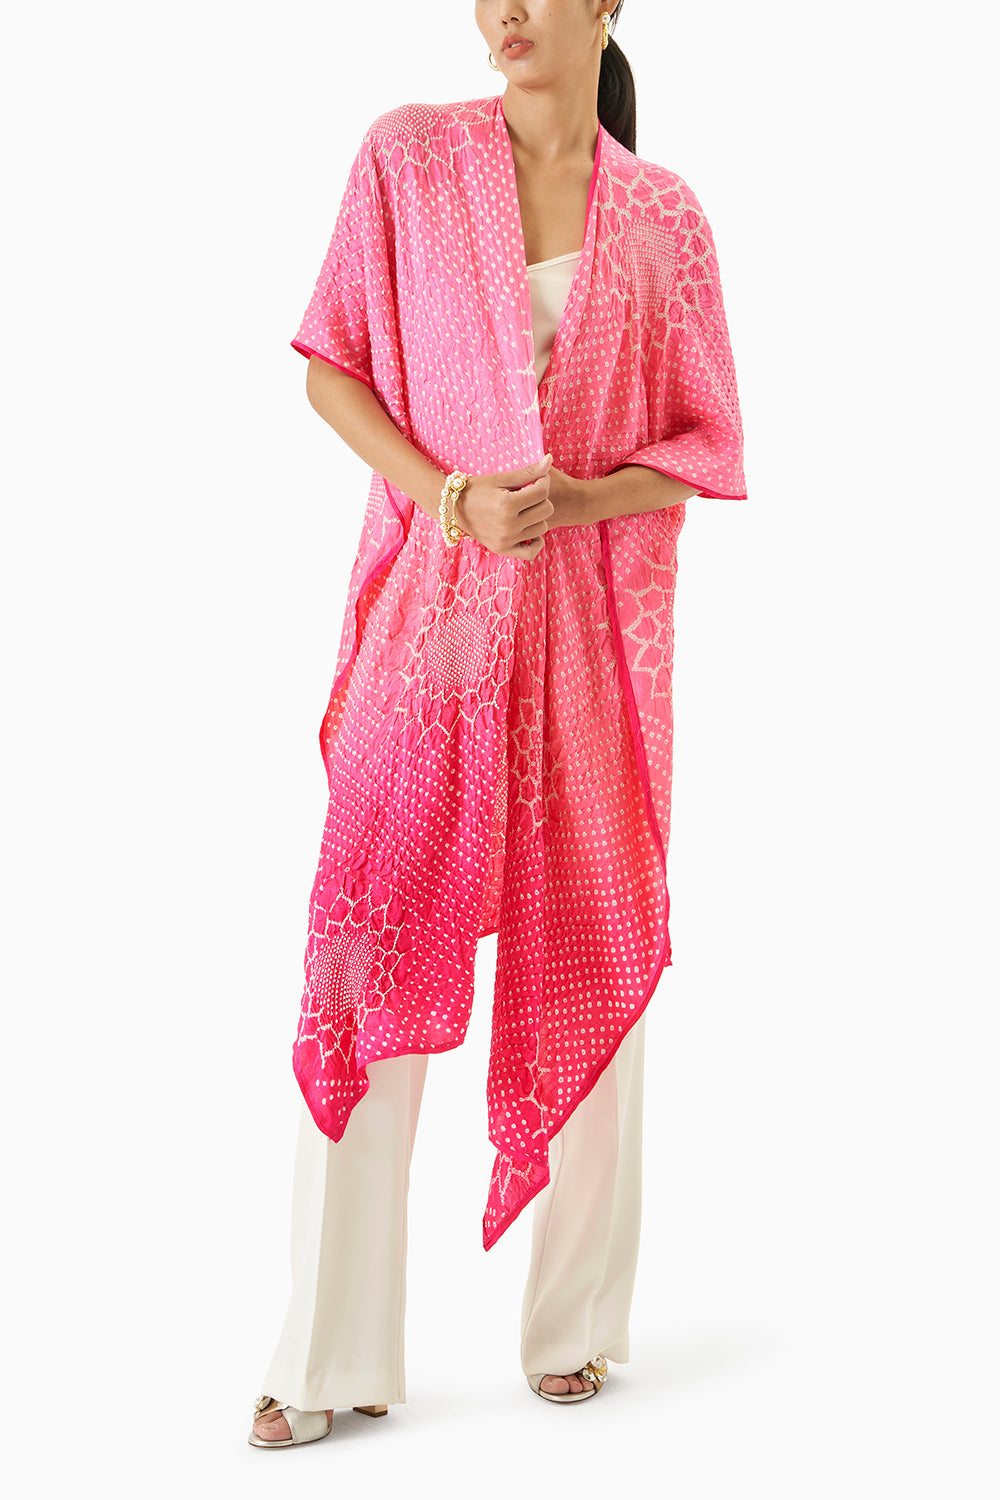 Pink Bandhani Overlay with Lapels